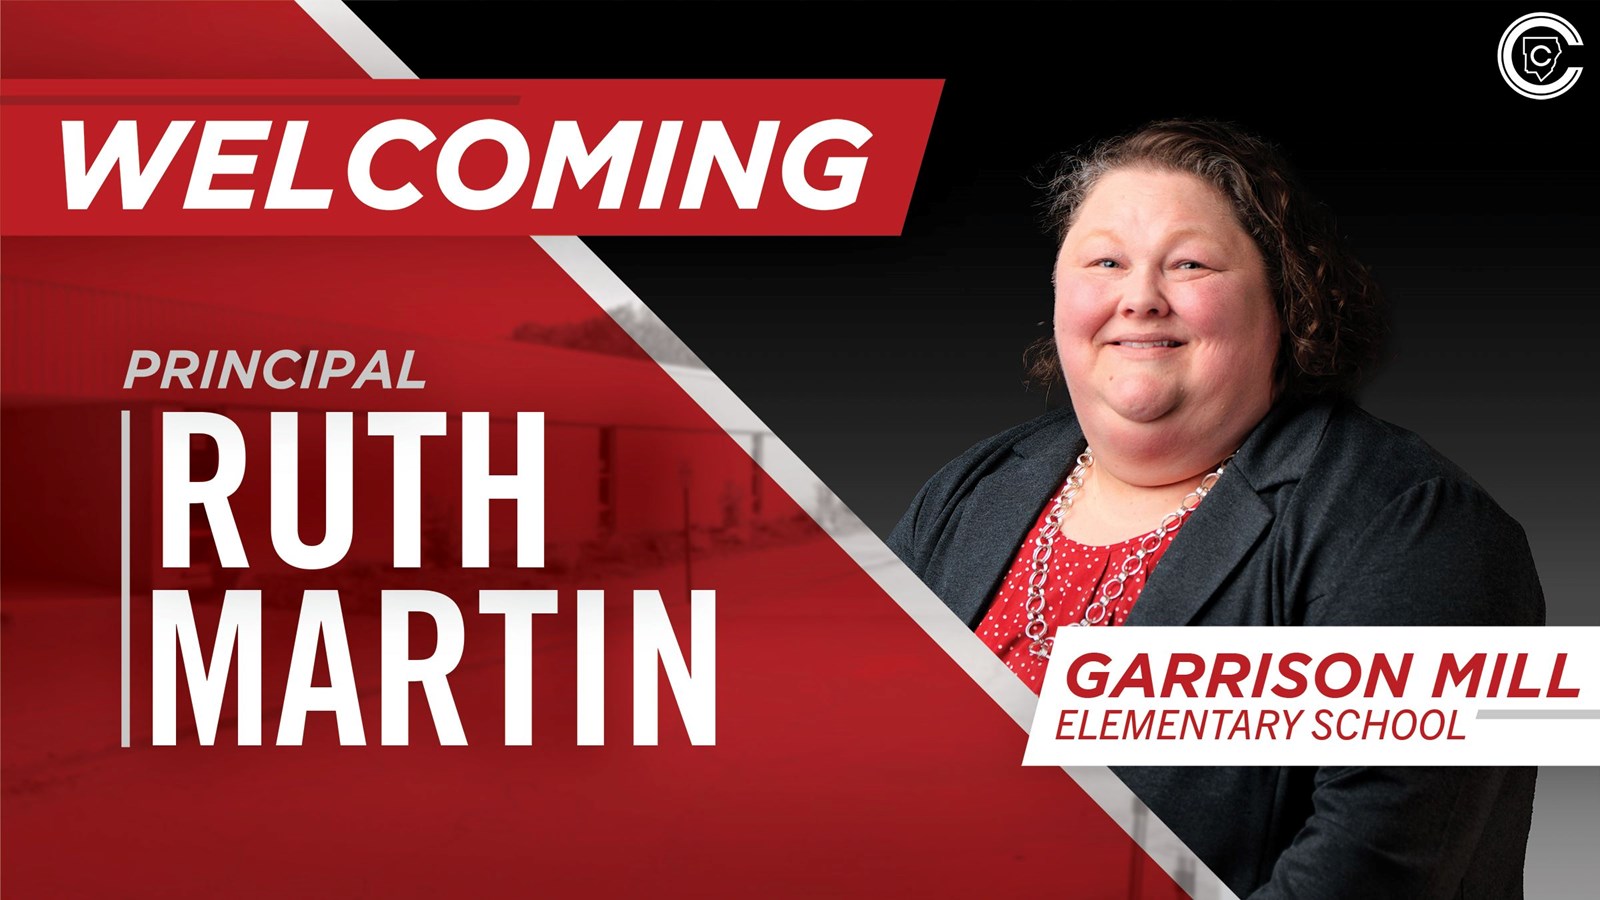 Ruth Martin is the new principal of Garrison Mill Elementary School.